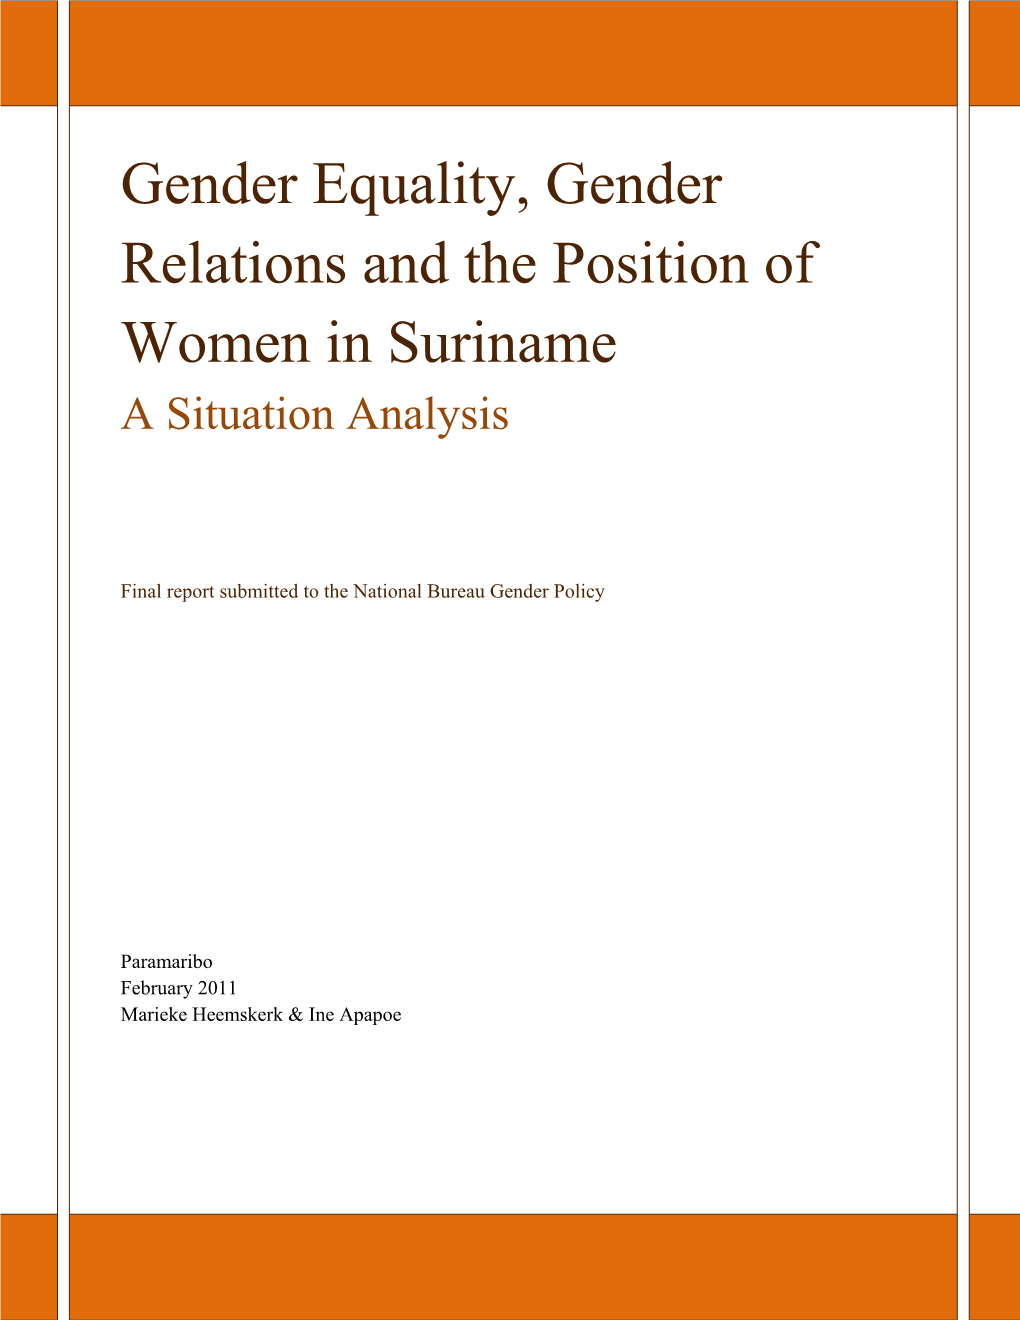 Gender Equality, Gender Relations and the Position of Women in Suriname a Situation Analysis